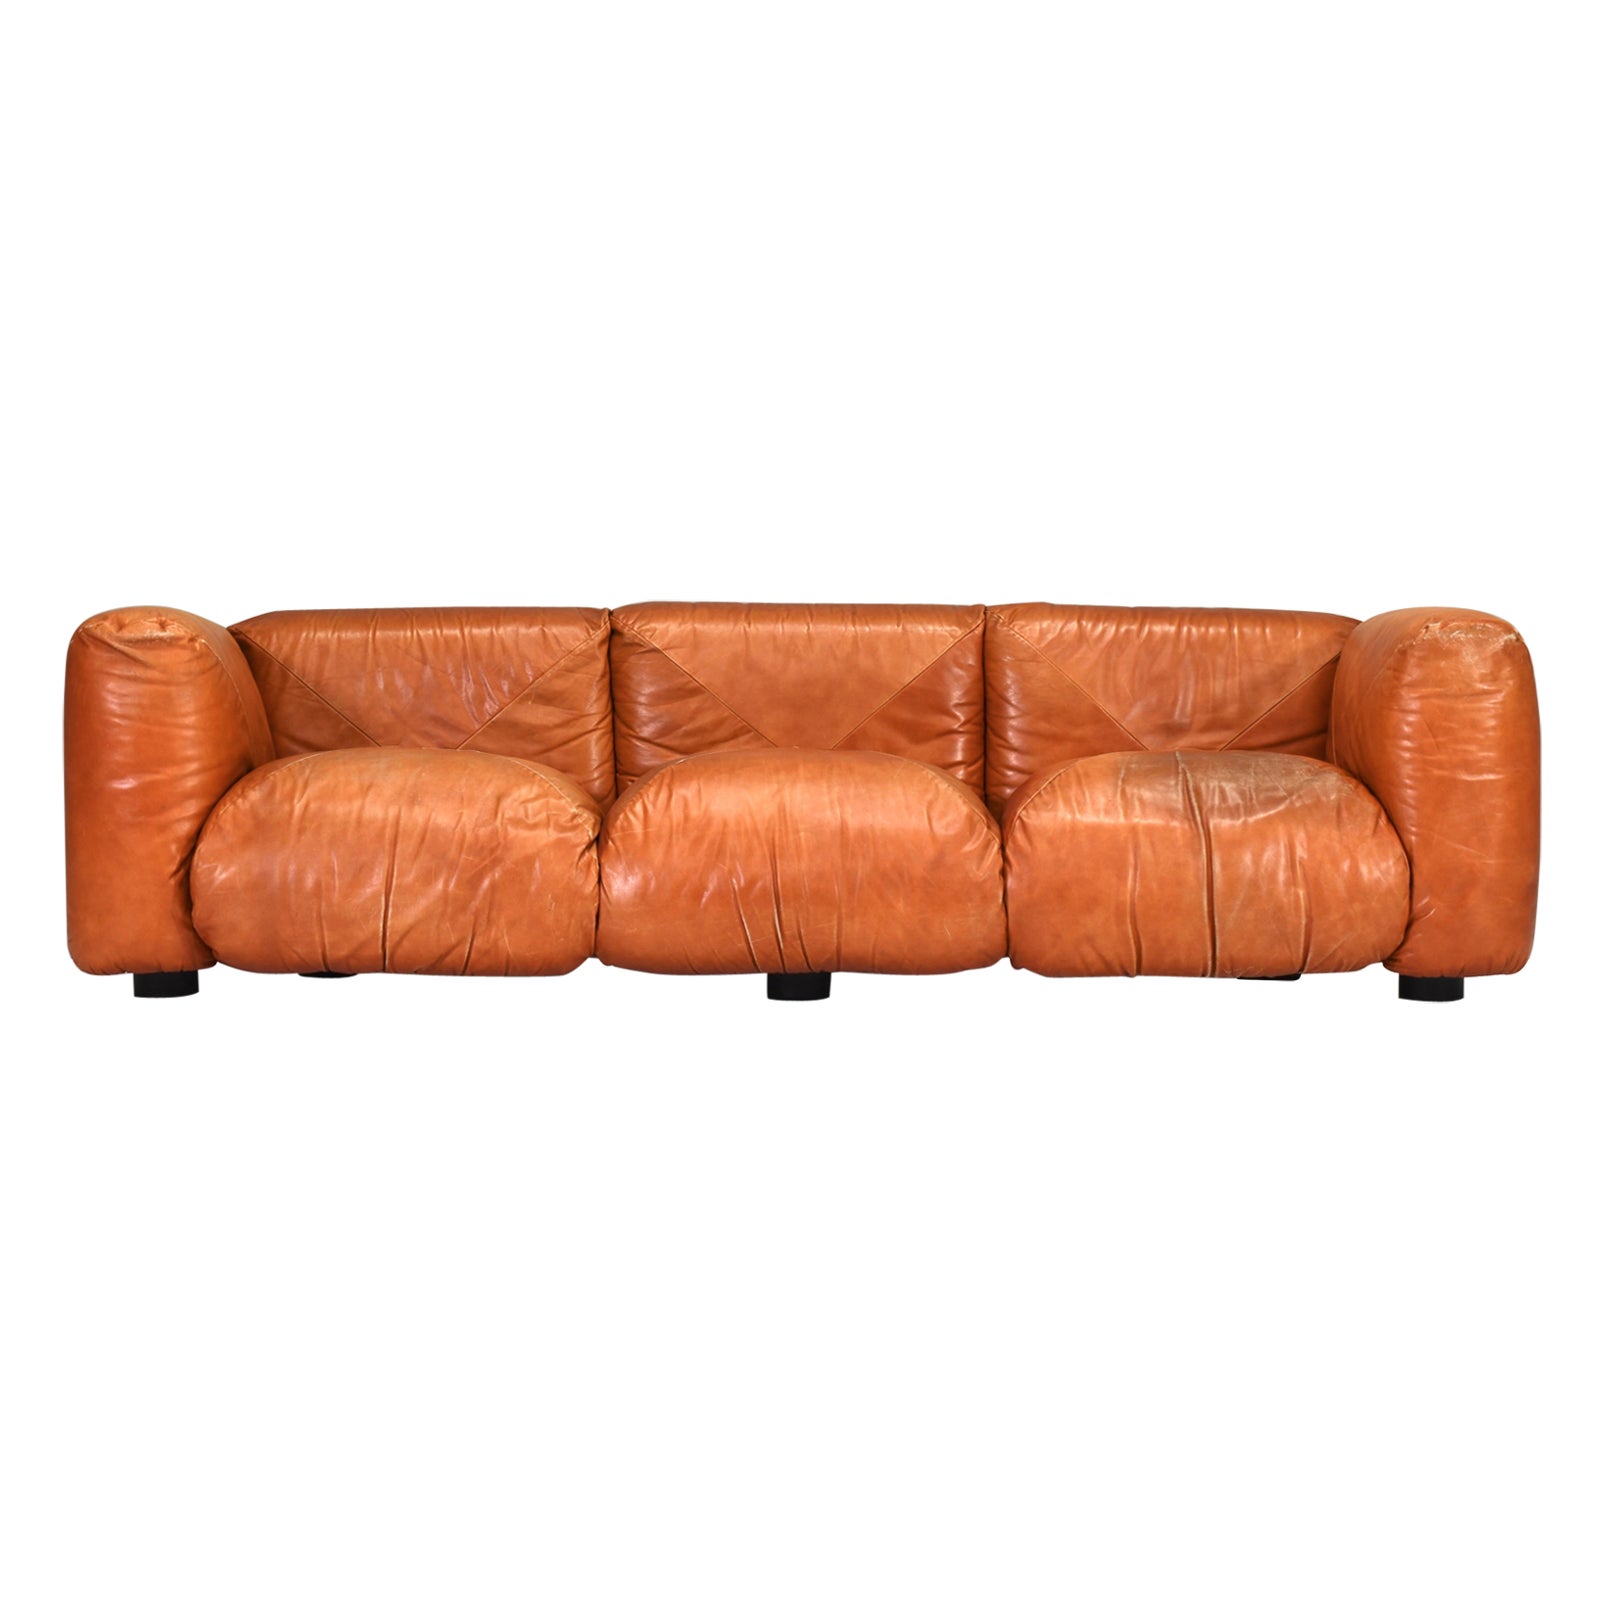 The Marius&Marius lounge chairs and sofa were designed by the Italian architect and designer Mario Marenco in 1970. He is known for distinctive and innovative designs, featuring large, plush cushions that appear to float on a lightweight, flexible